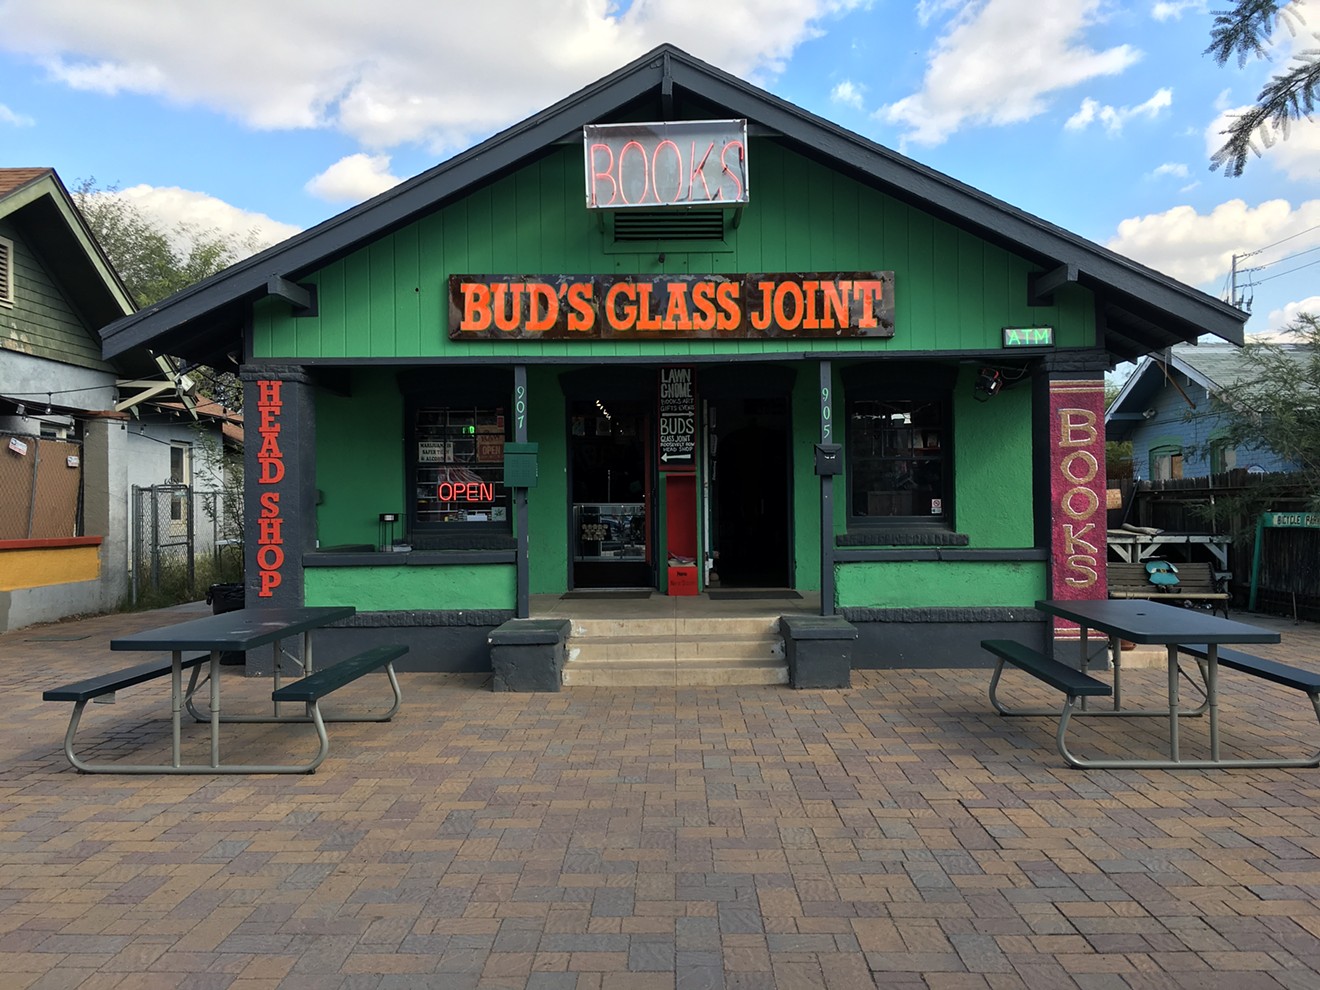 Bud's Glass Joint on Fifth Street in Roosevelt Row.